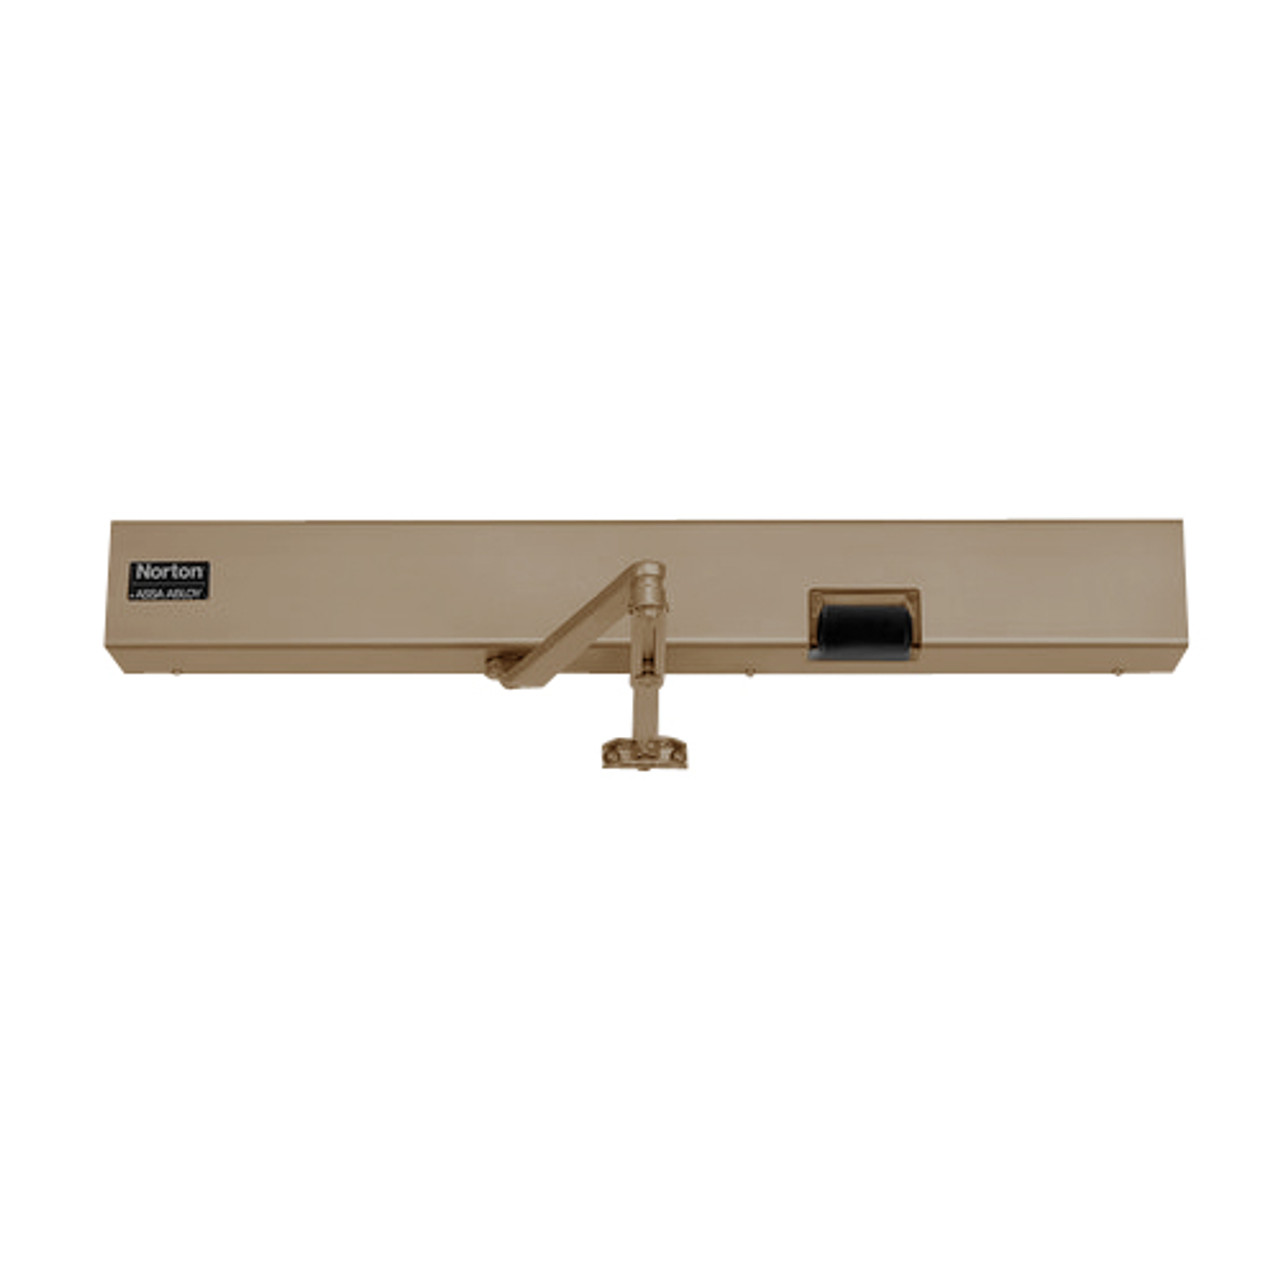 7132SZ-DZ-RH-120VAC-691 Norton 7100SZ Series Safe Zone Multi-Point Closer/Holder with Motion Sensor and Push Side Double Lever 13-1/2 inch Main Arm in Dull Bronze Finish